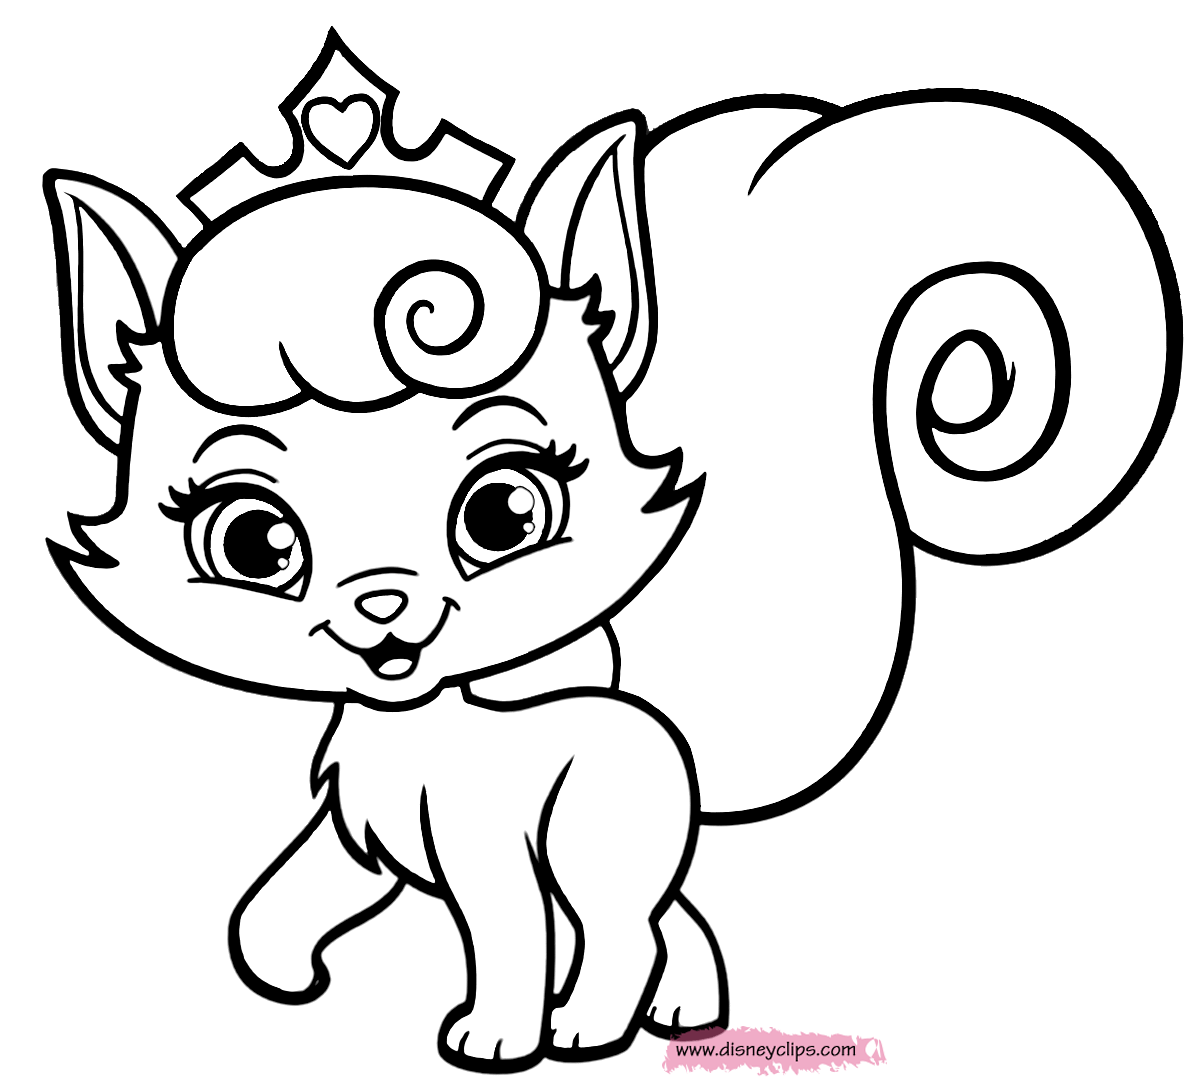 kitten color pages kitten coloring pages best coloring pages for kids pages kitten color 1 1